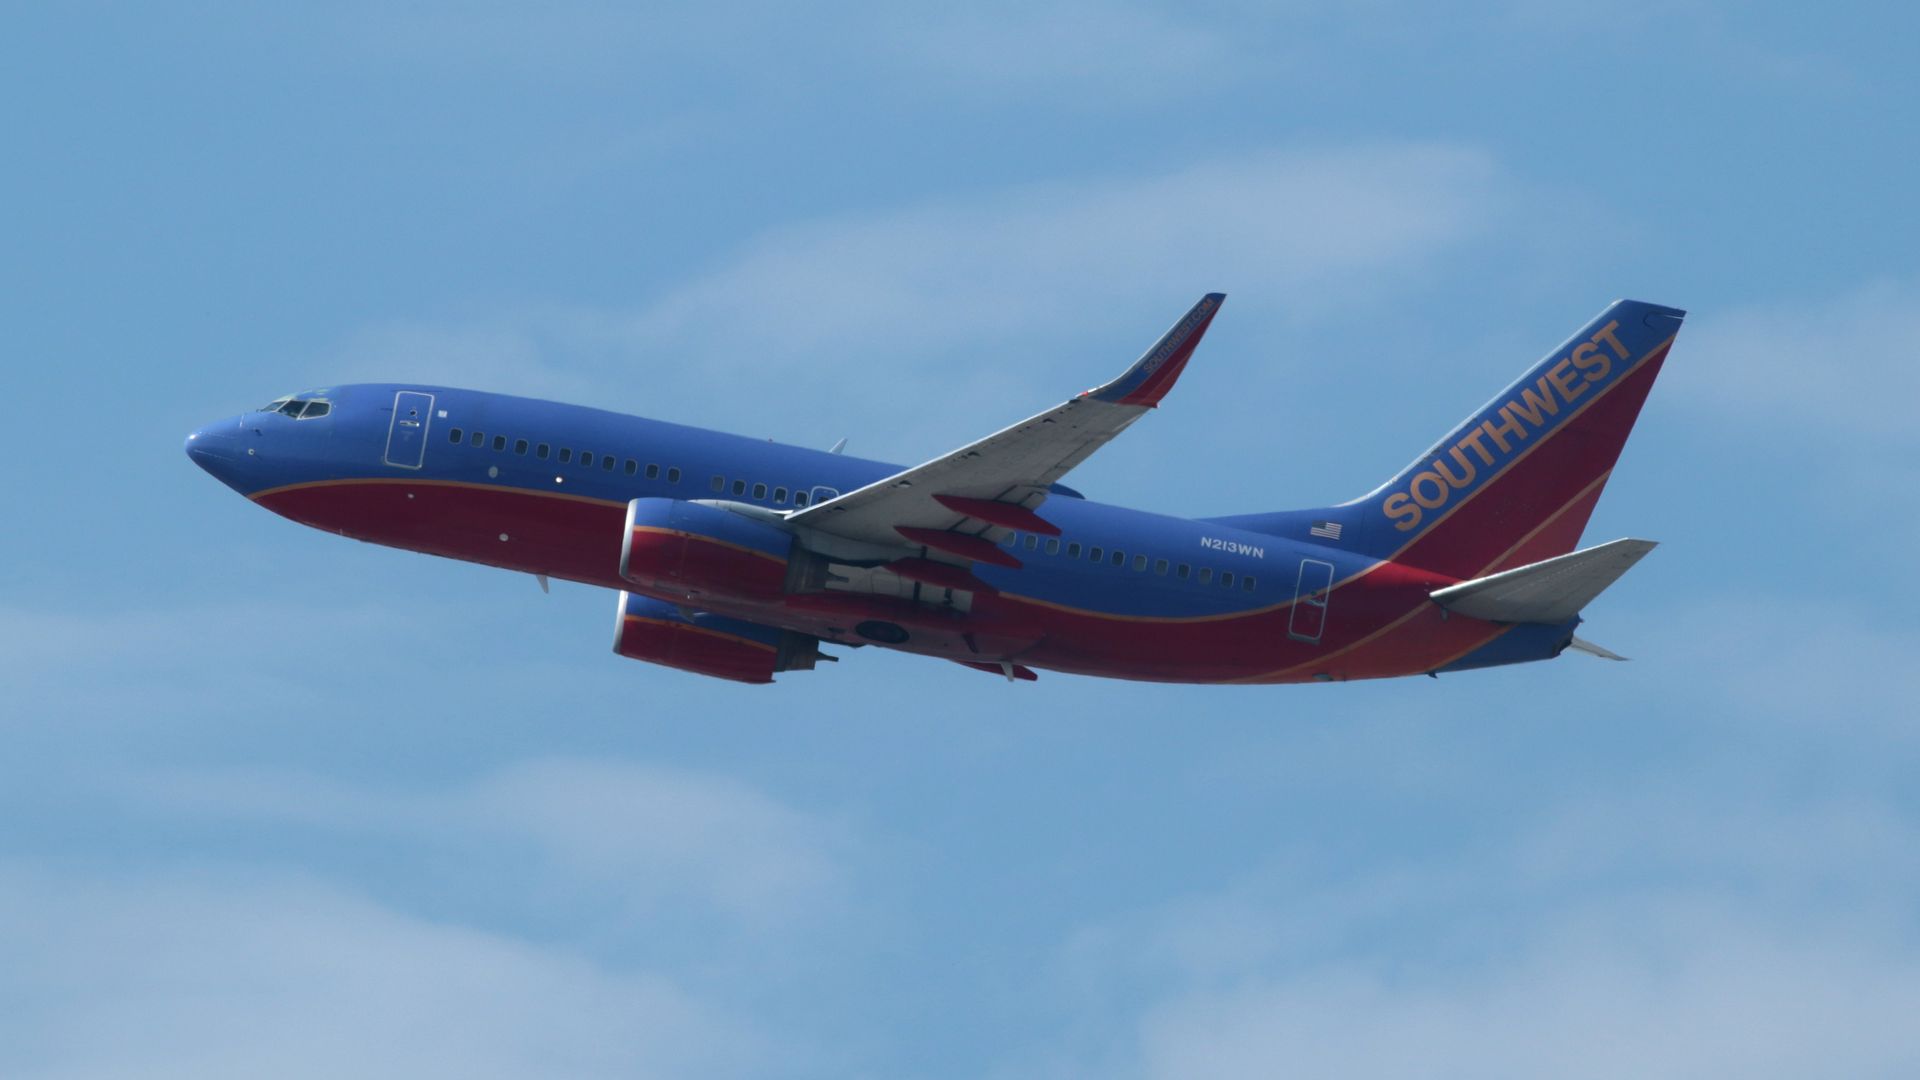 A Southwest Airlines plane in the sky